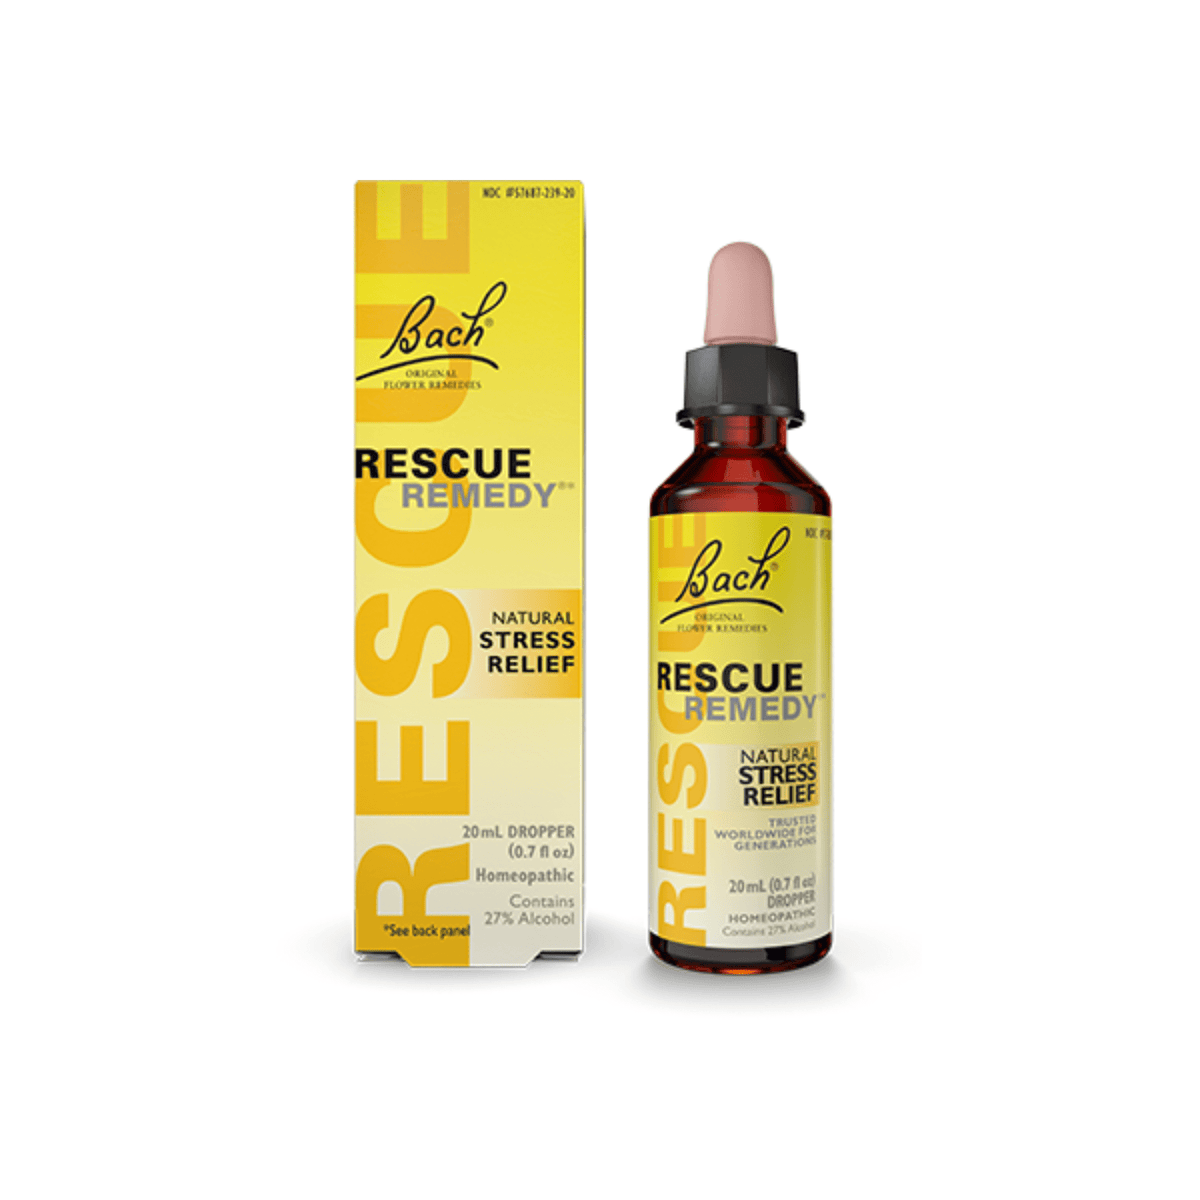 Primary Image of Rescue Remedy